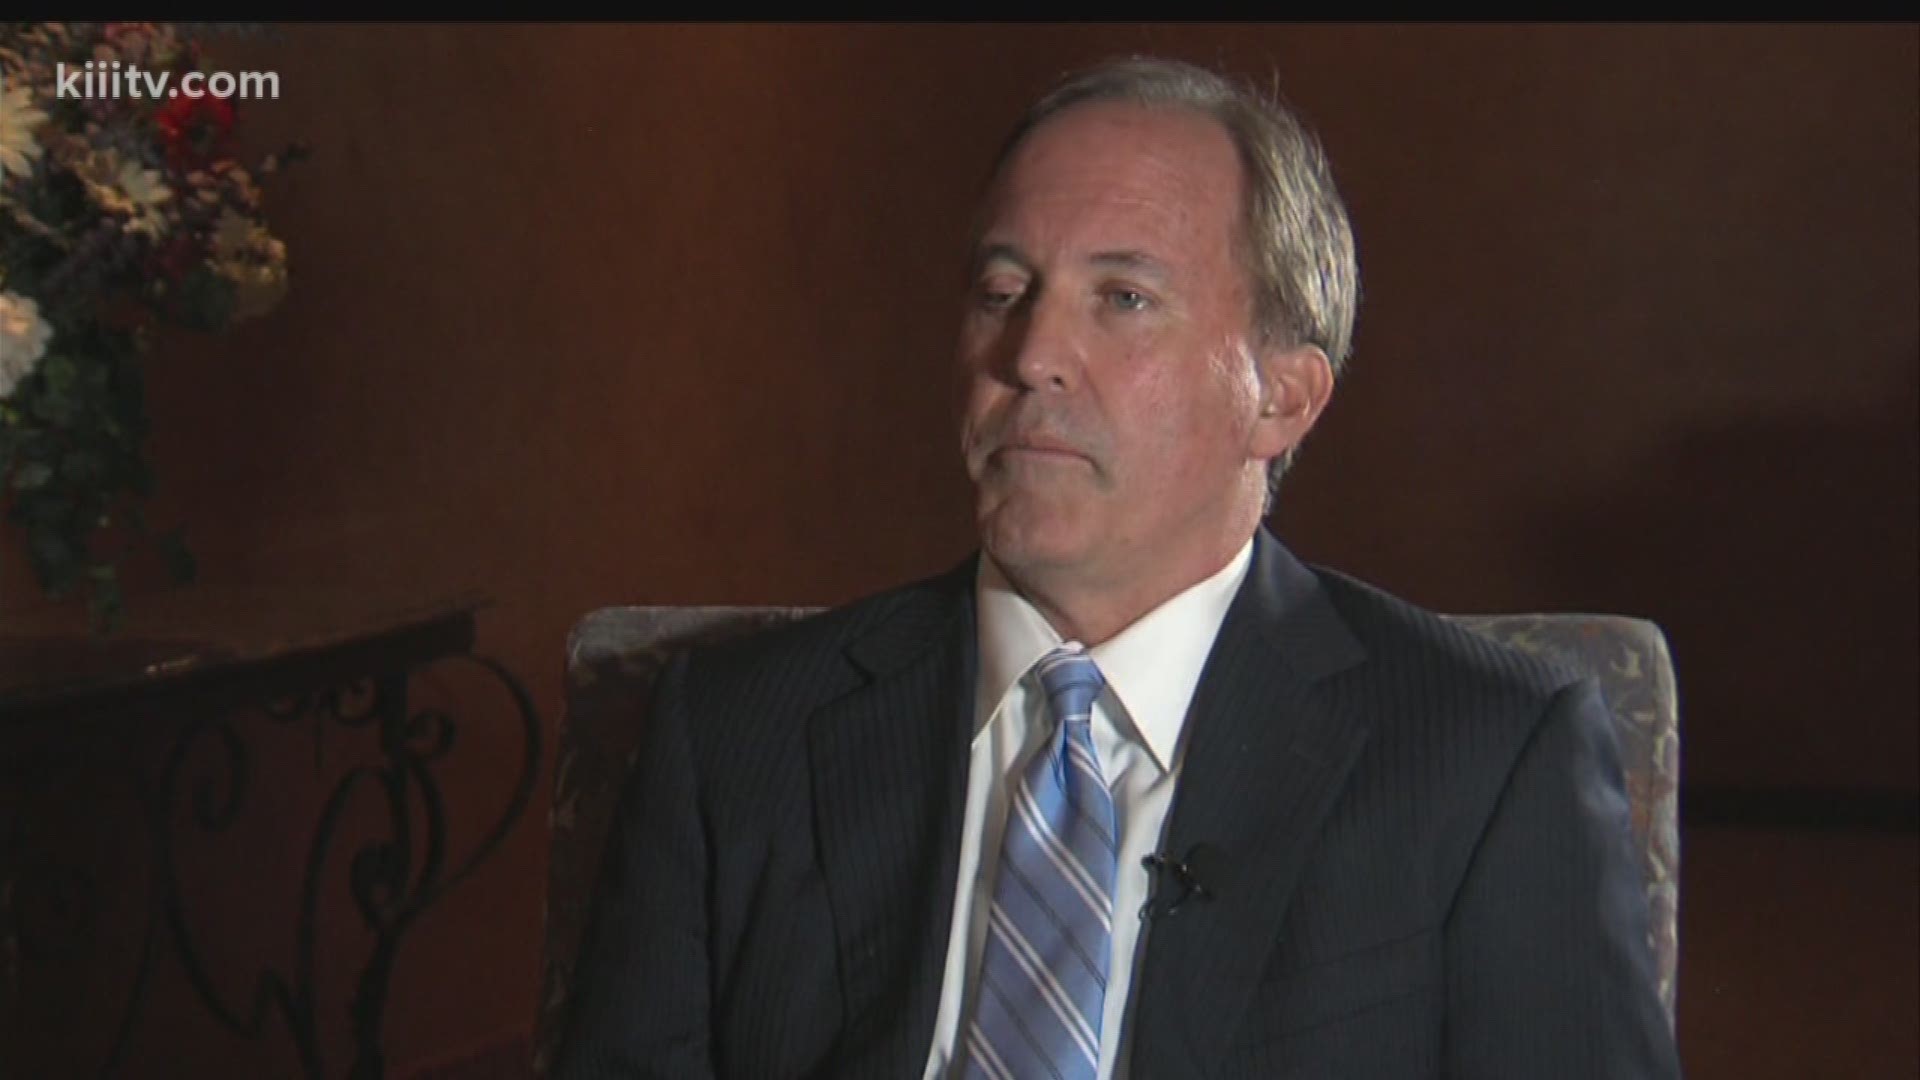 Texas Attorney General Ken Paxton says putting a stop to that epidemic is one of his top priorities.